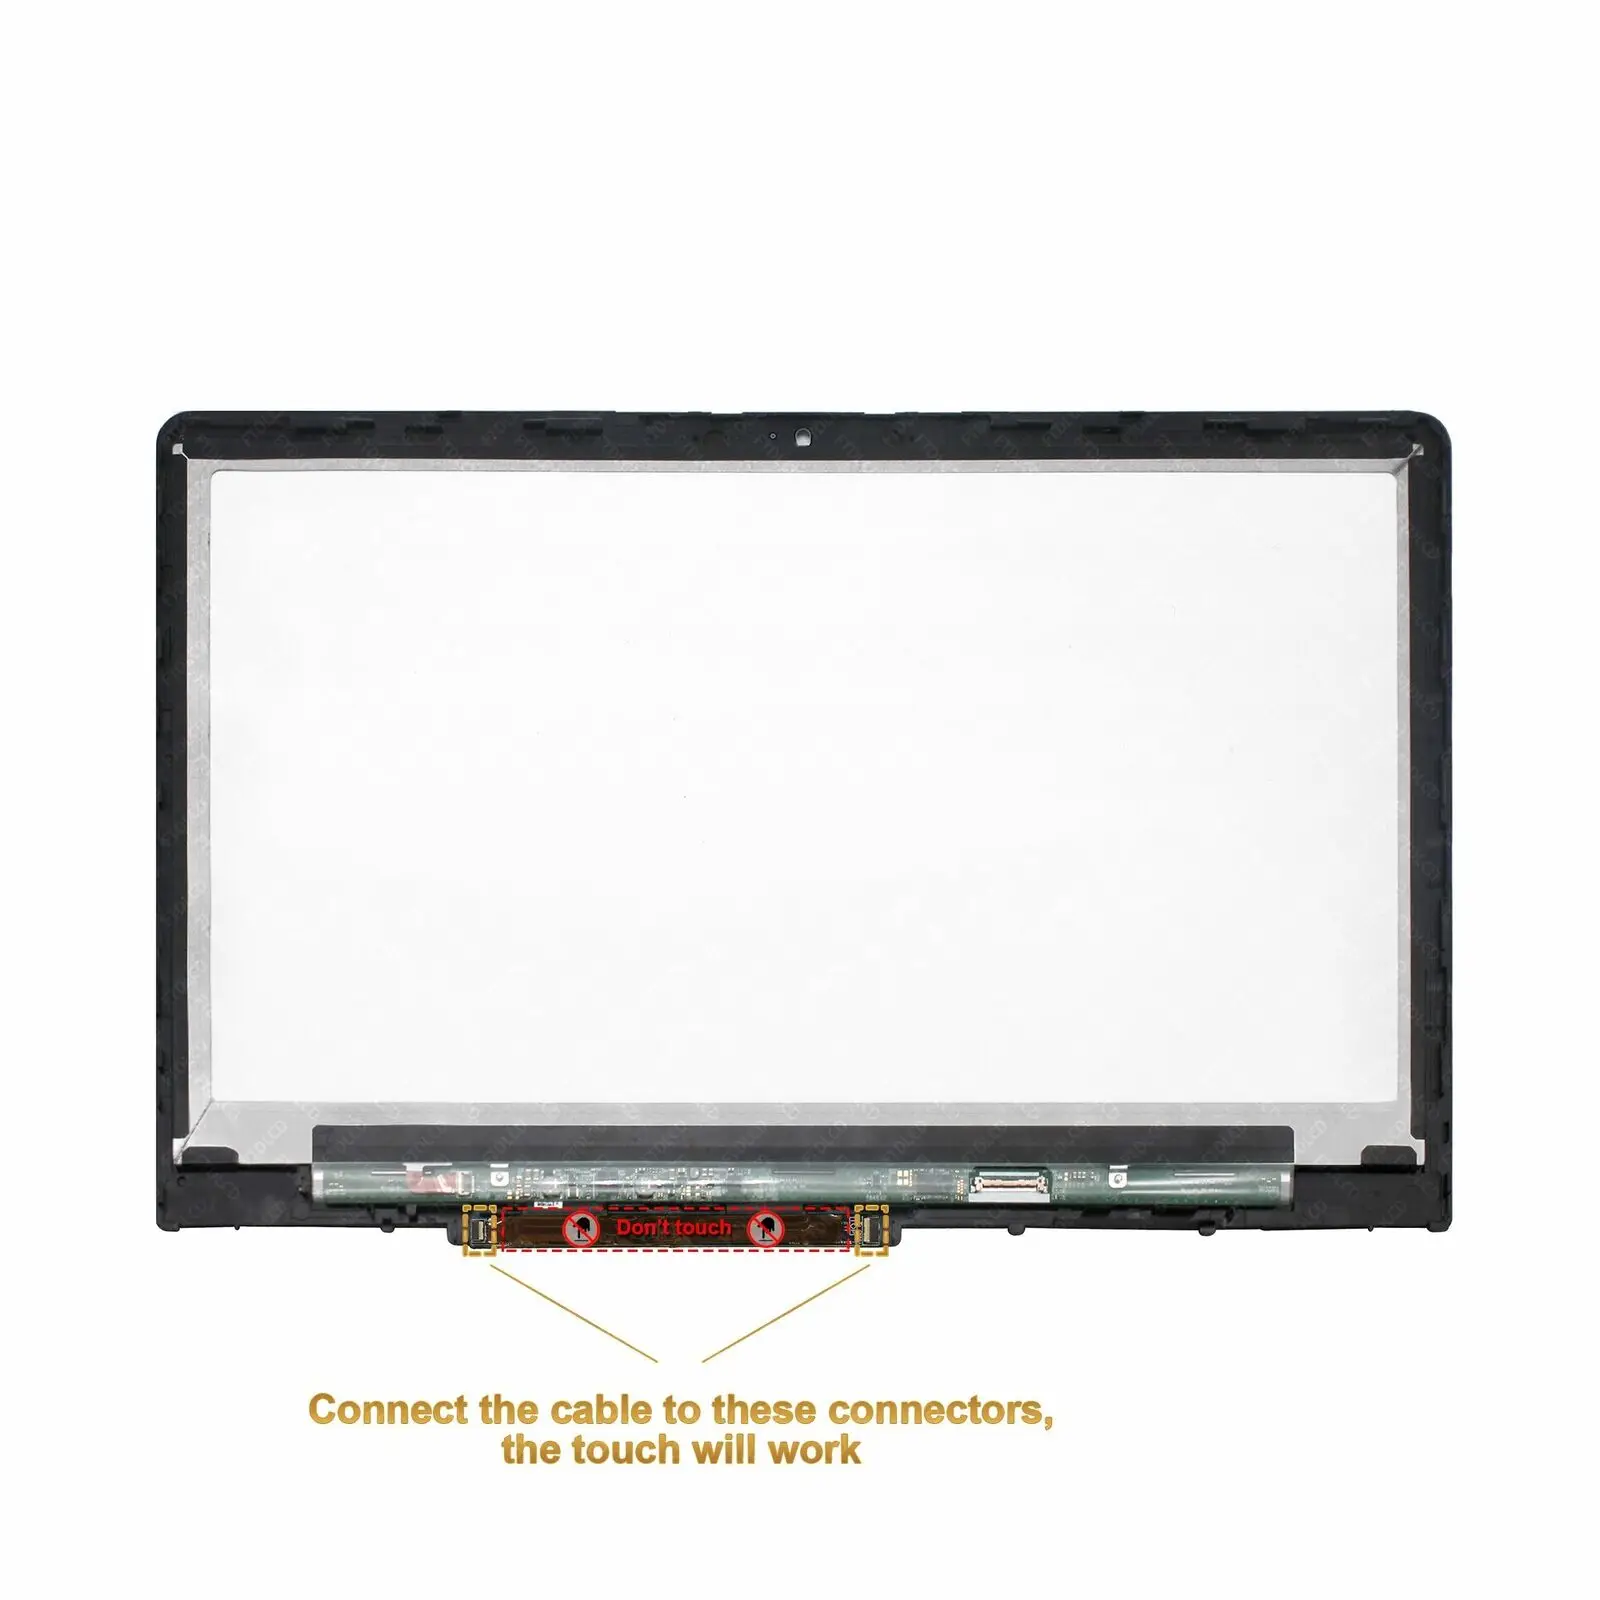 jianglun 15 6 fhd led lcd touchscreen digitizer display for hp pavilion x360 15 br052od free global shipping